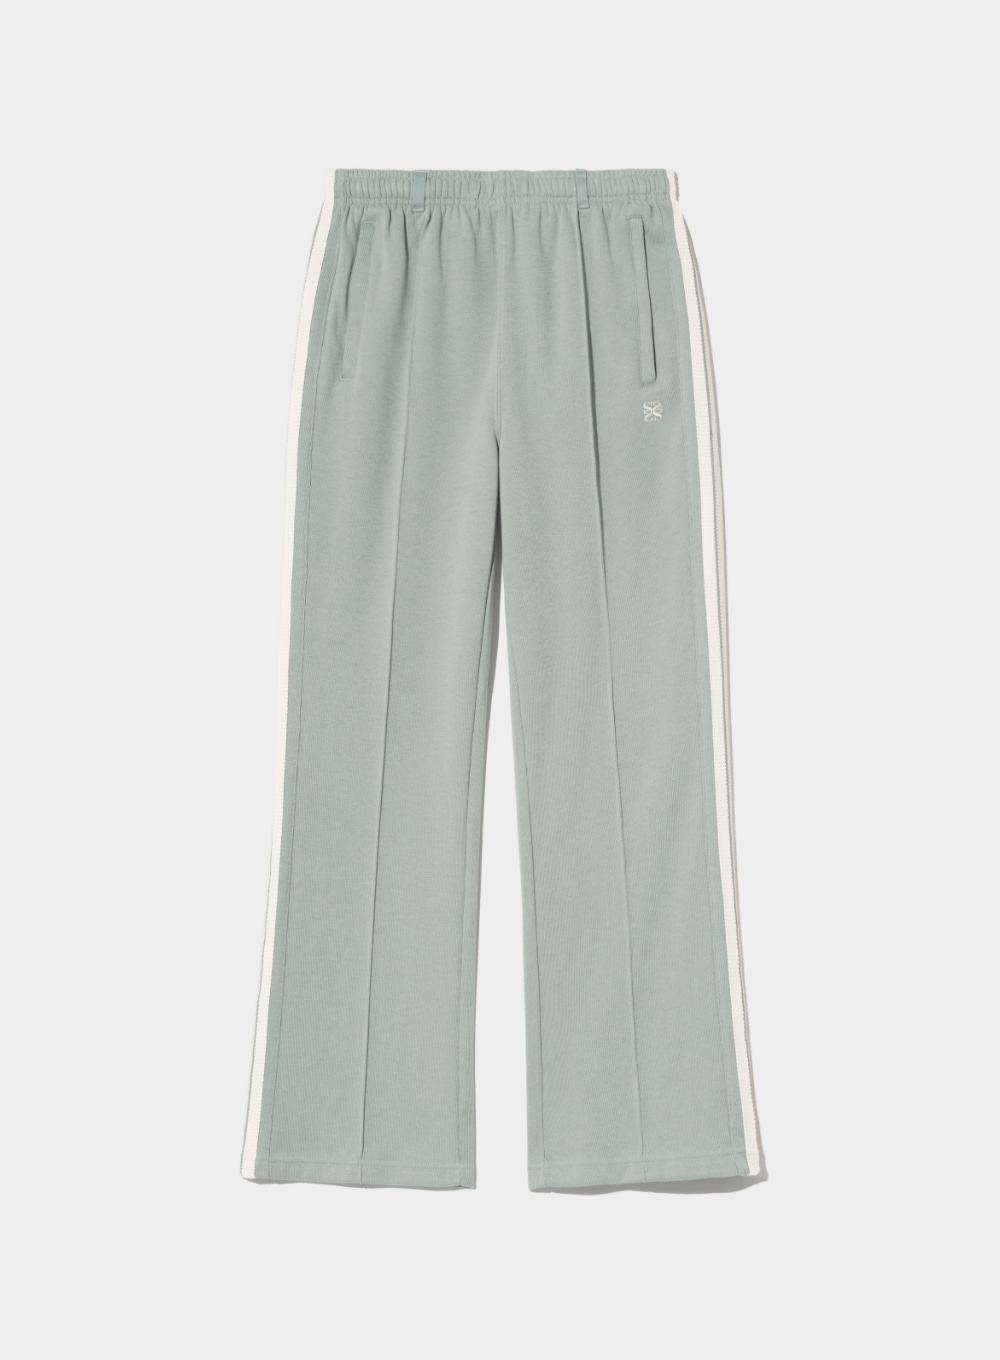 (W) Lawton All Day Track Pants - Olive Mint